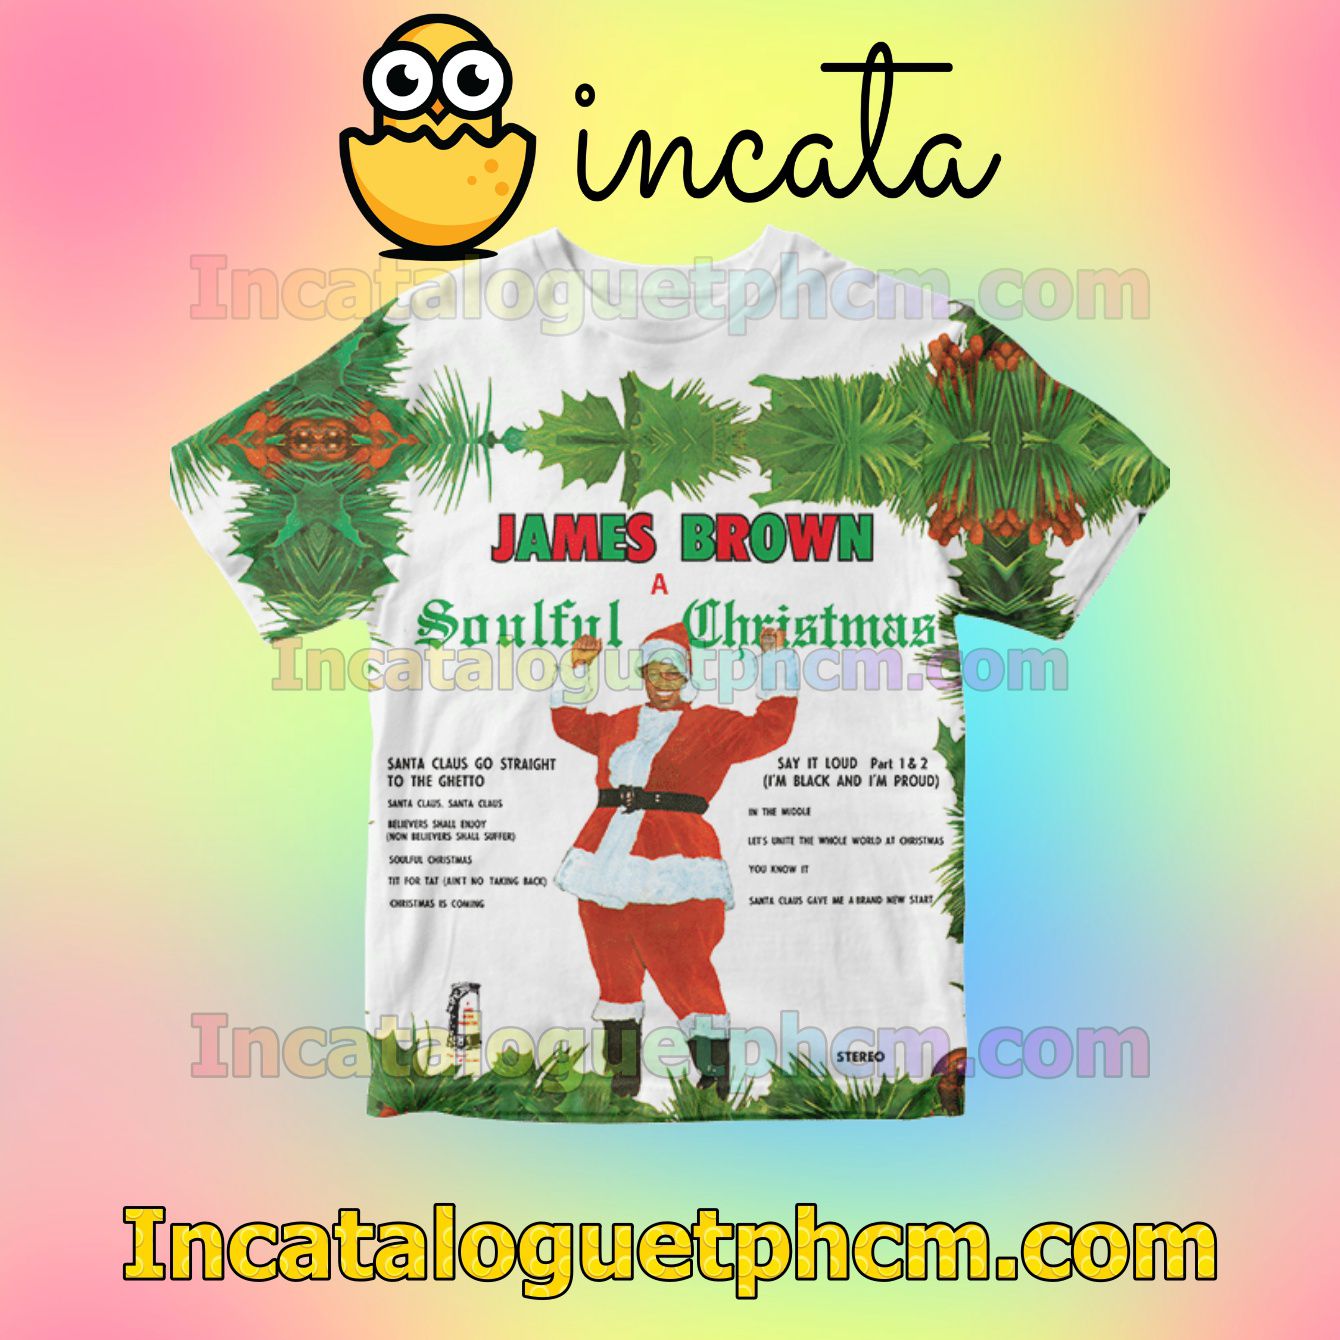 James Brown A Soulful Christmas Album Cover Personalized Shirt